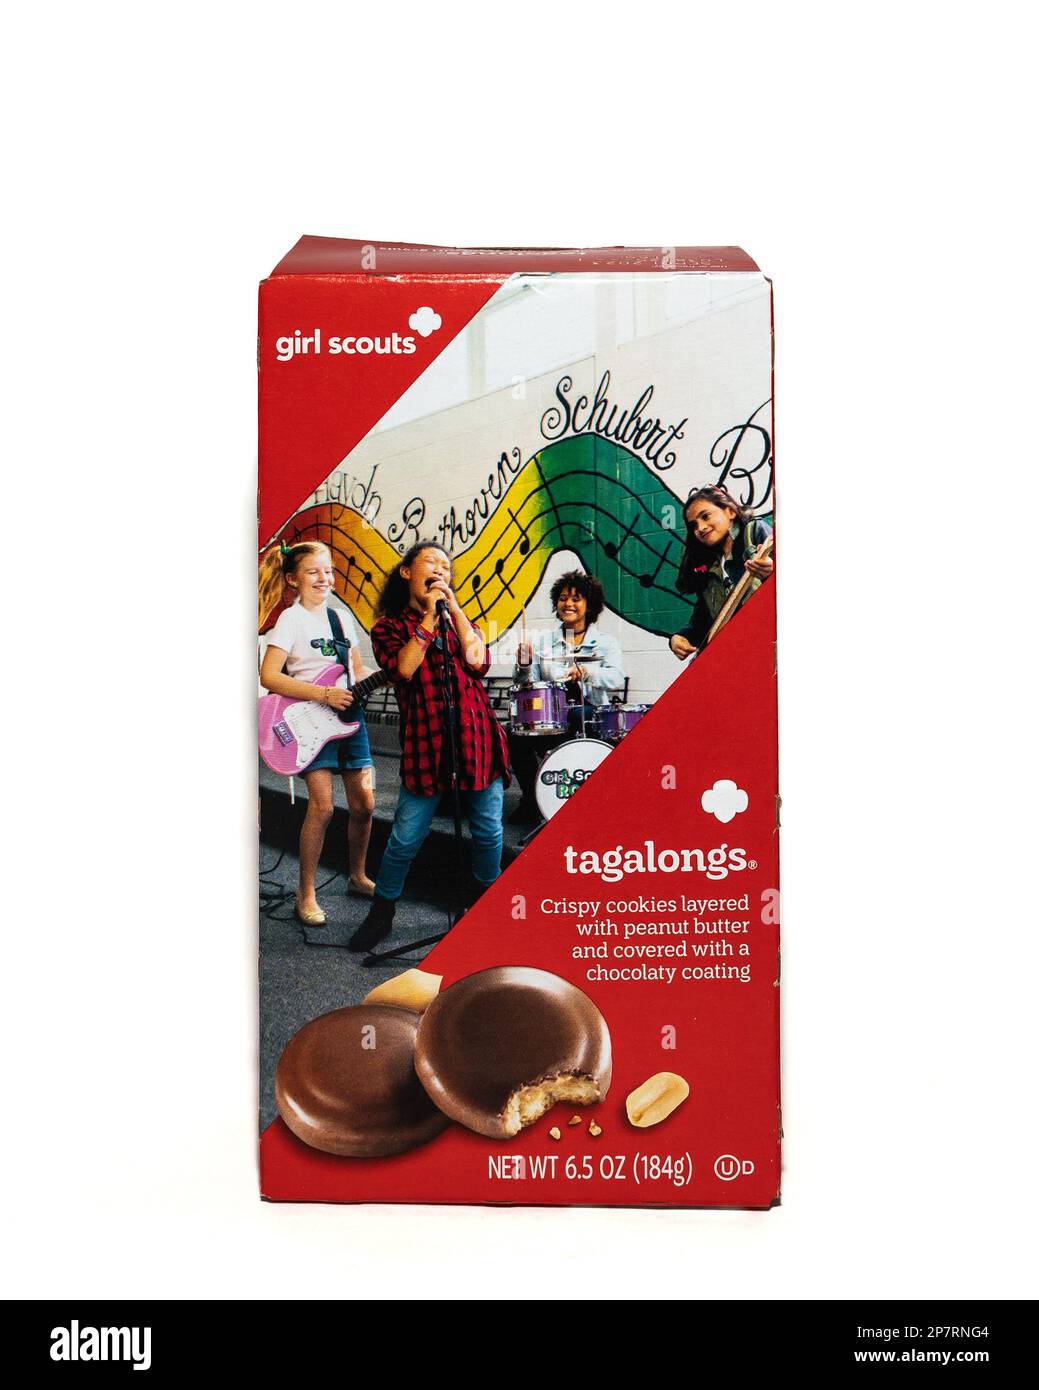 A bright red box of tagalongs Girl Scout cookies, crispy cookies layered with peanut butter and covered with a chocolaty coating Stock Photo